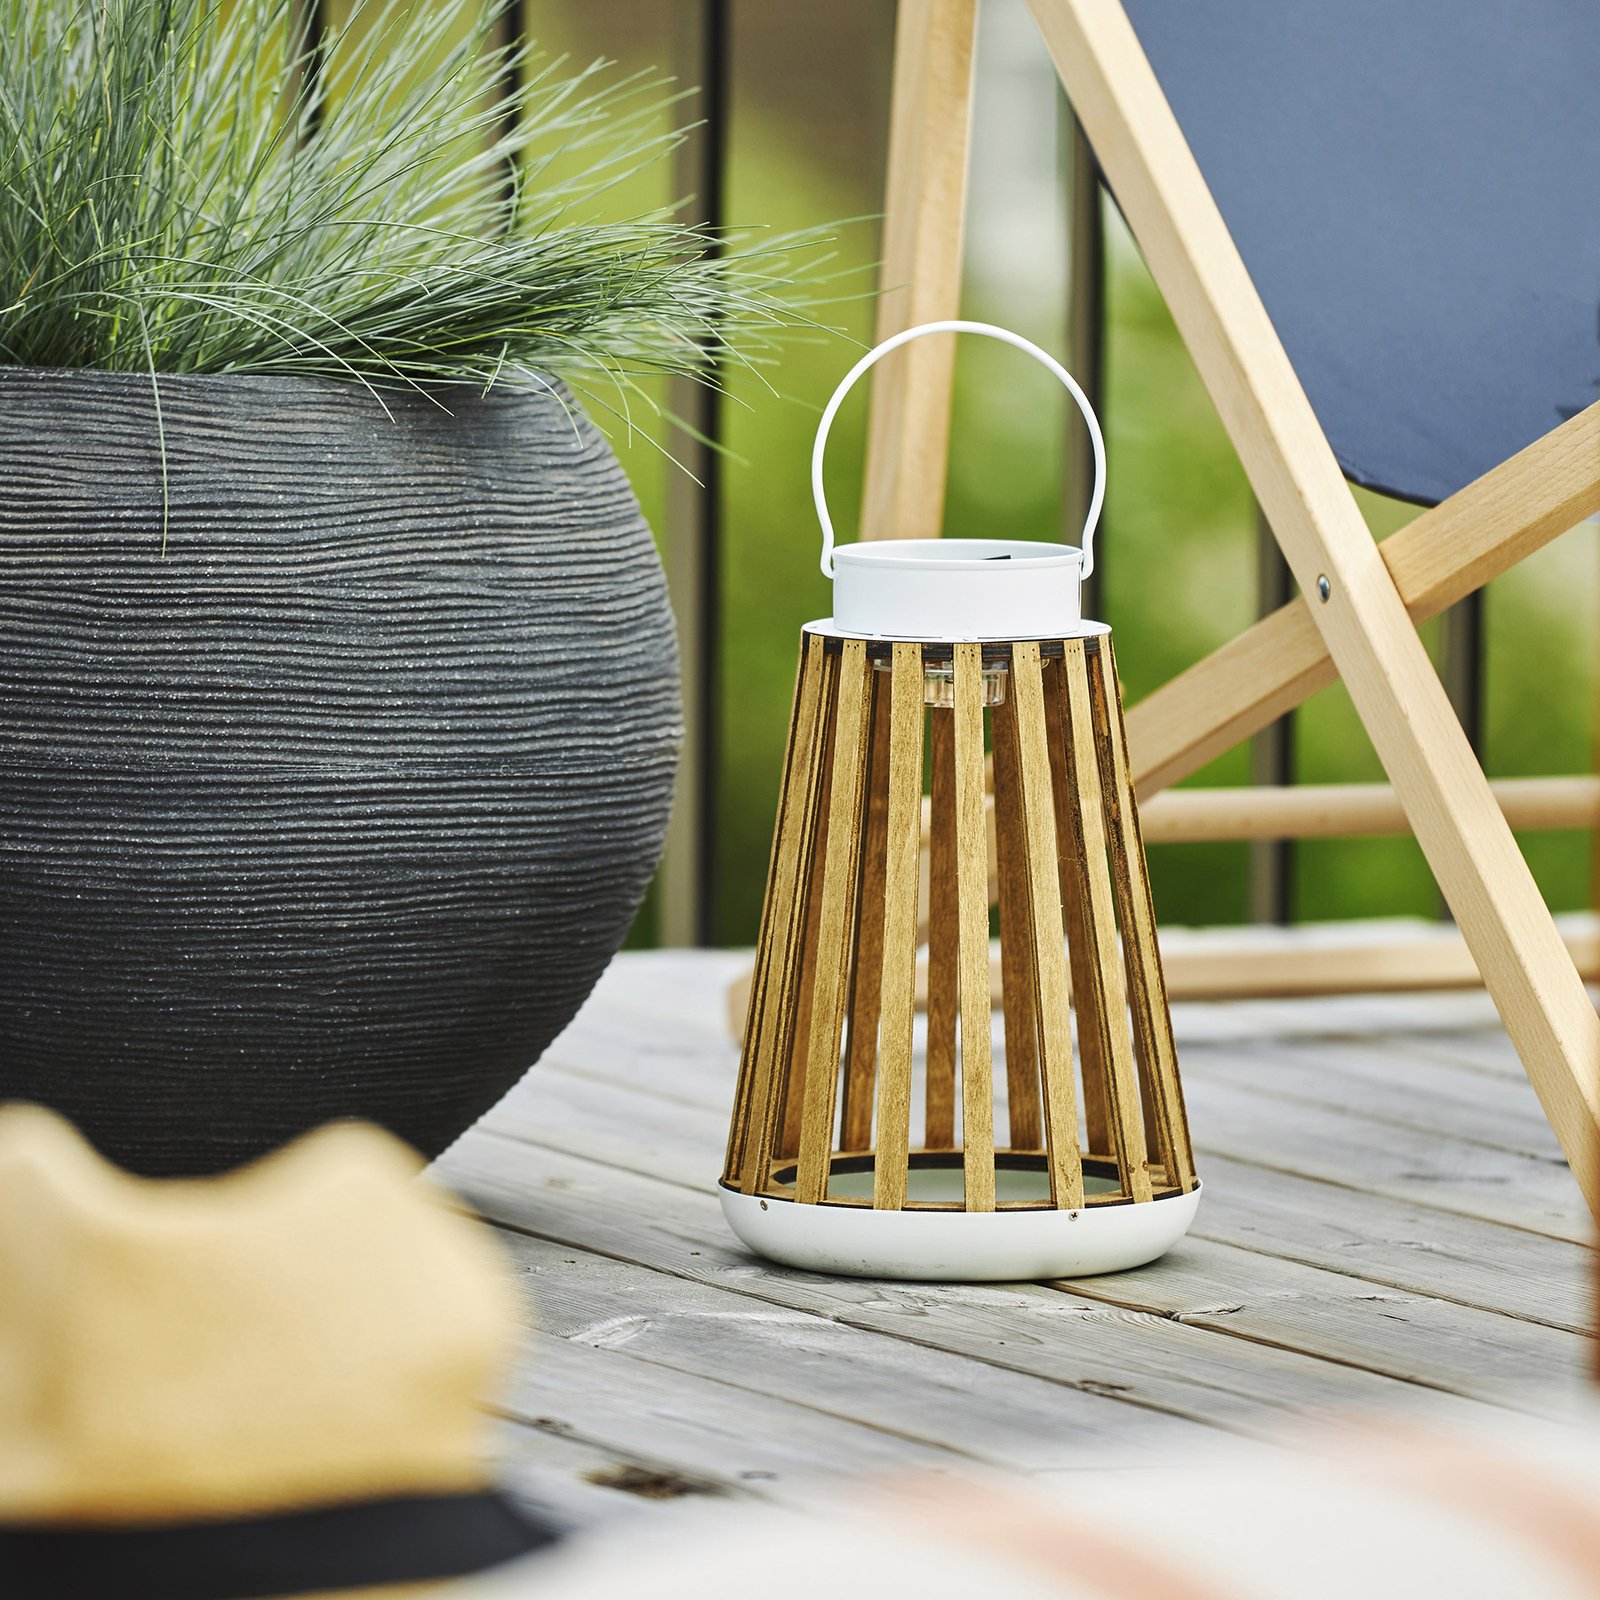 Catania LED solar table lamp made of birch wood